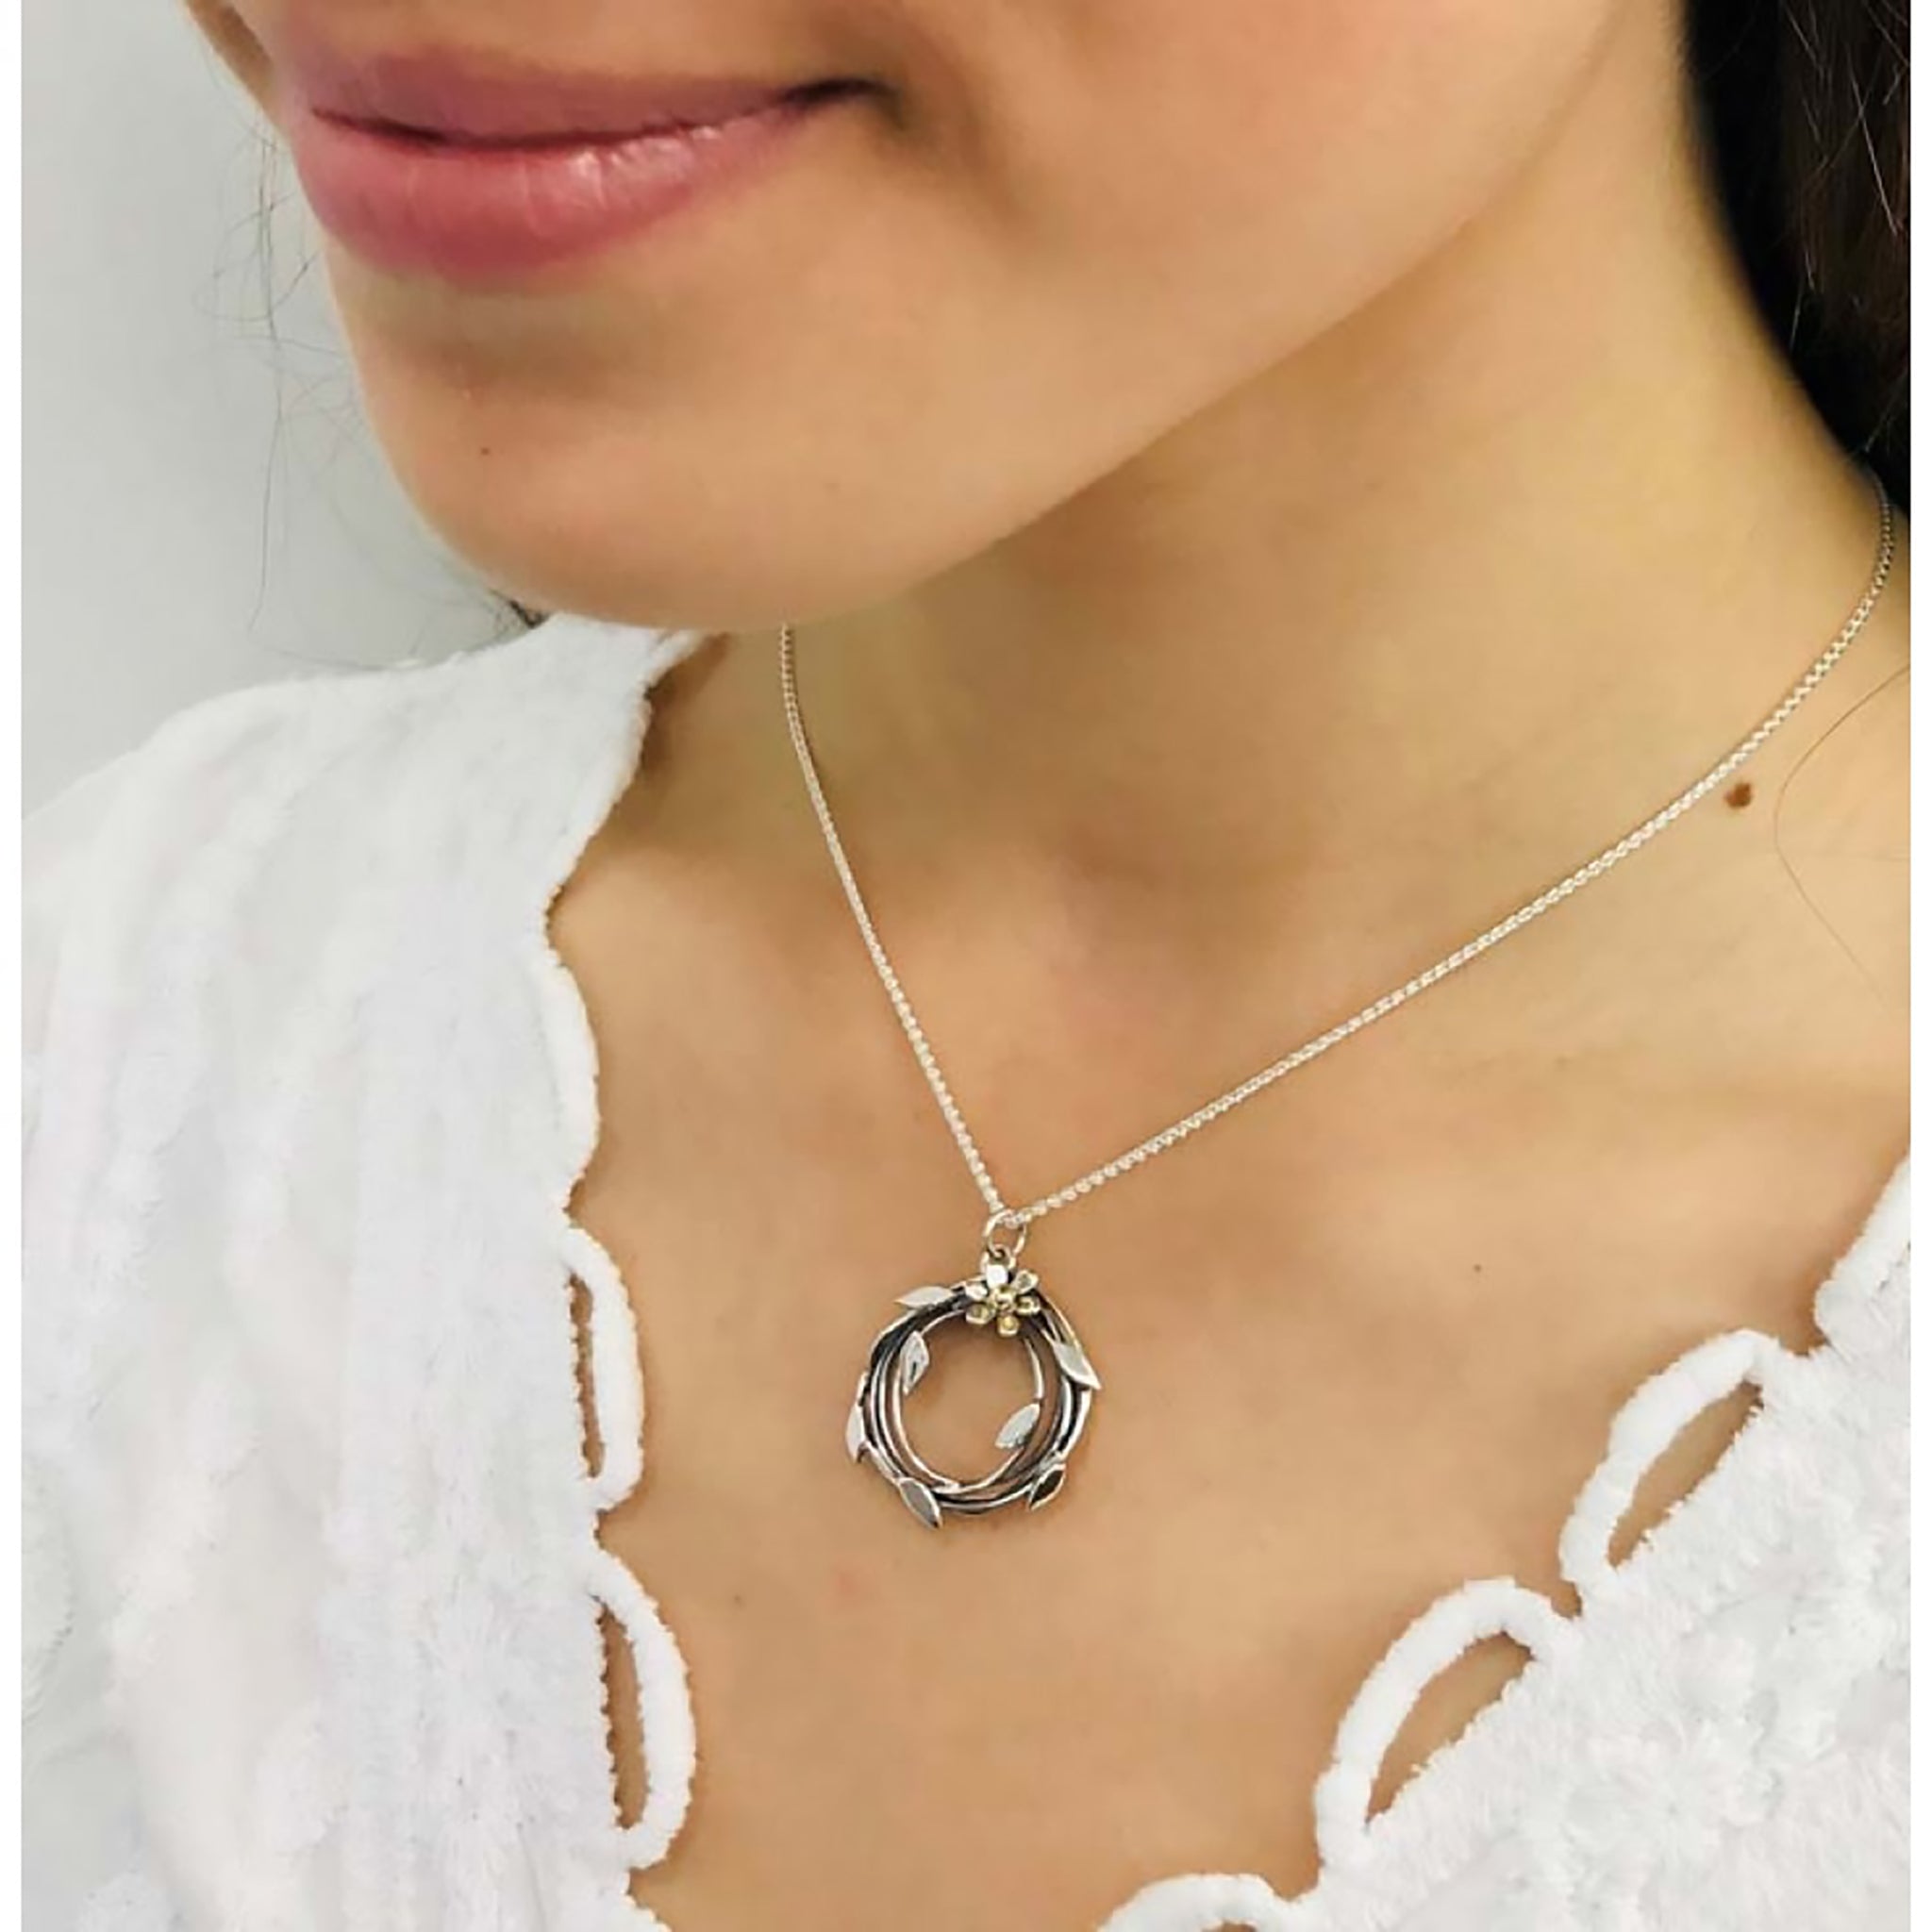 Model wearing large round woven vine wreath shaped pendant with leaf details and a flower with gold centre